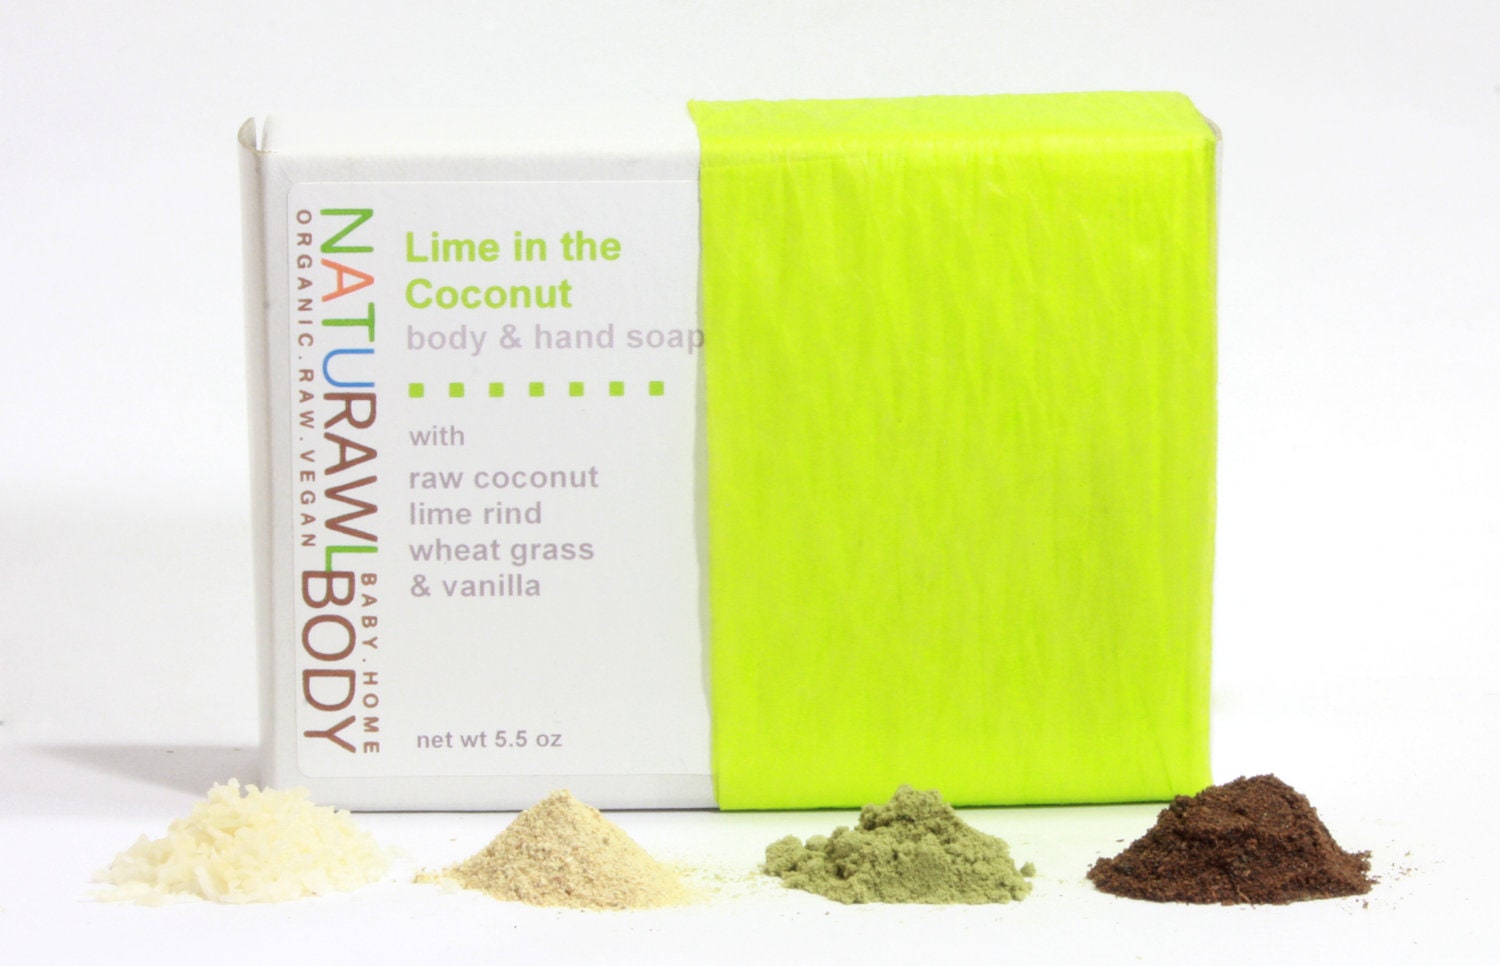 Lime in the Coconut Hand & Body Bar Soap - 5.5 oz